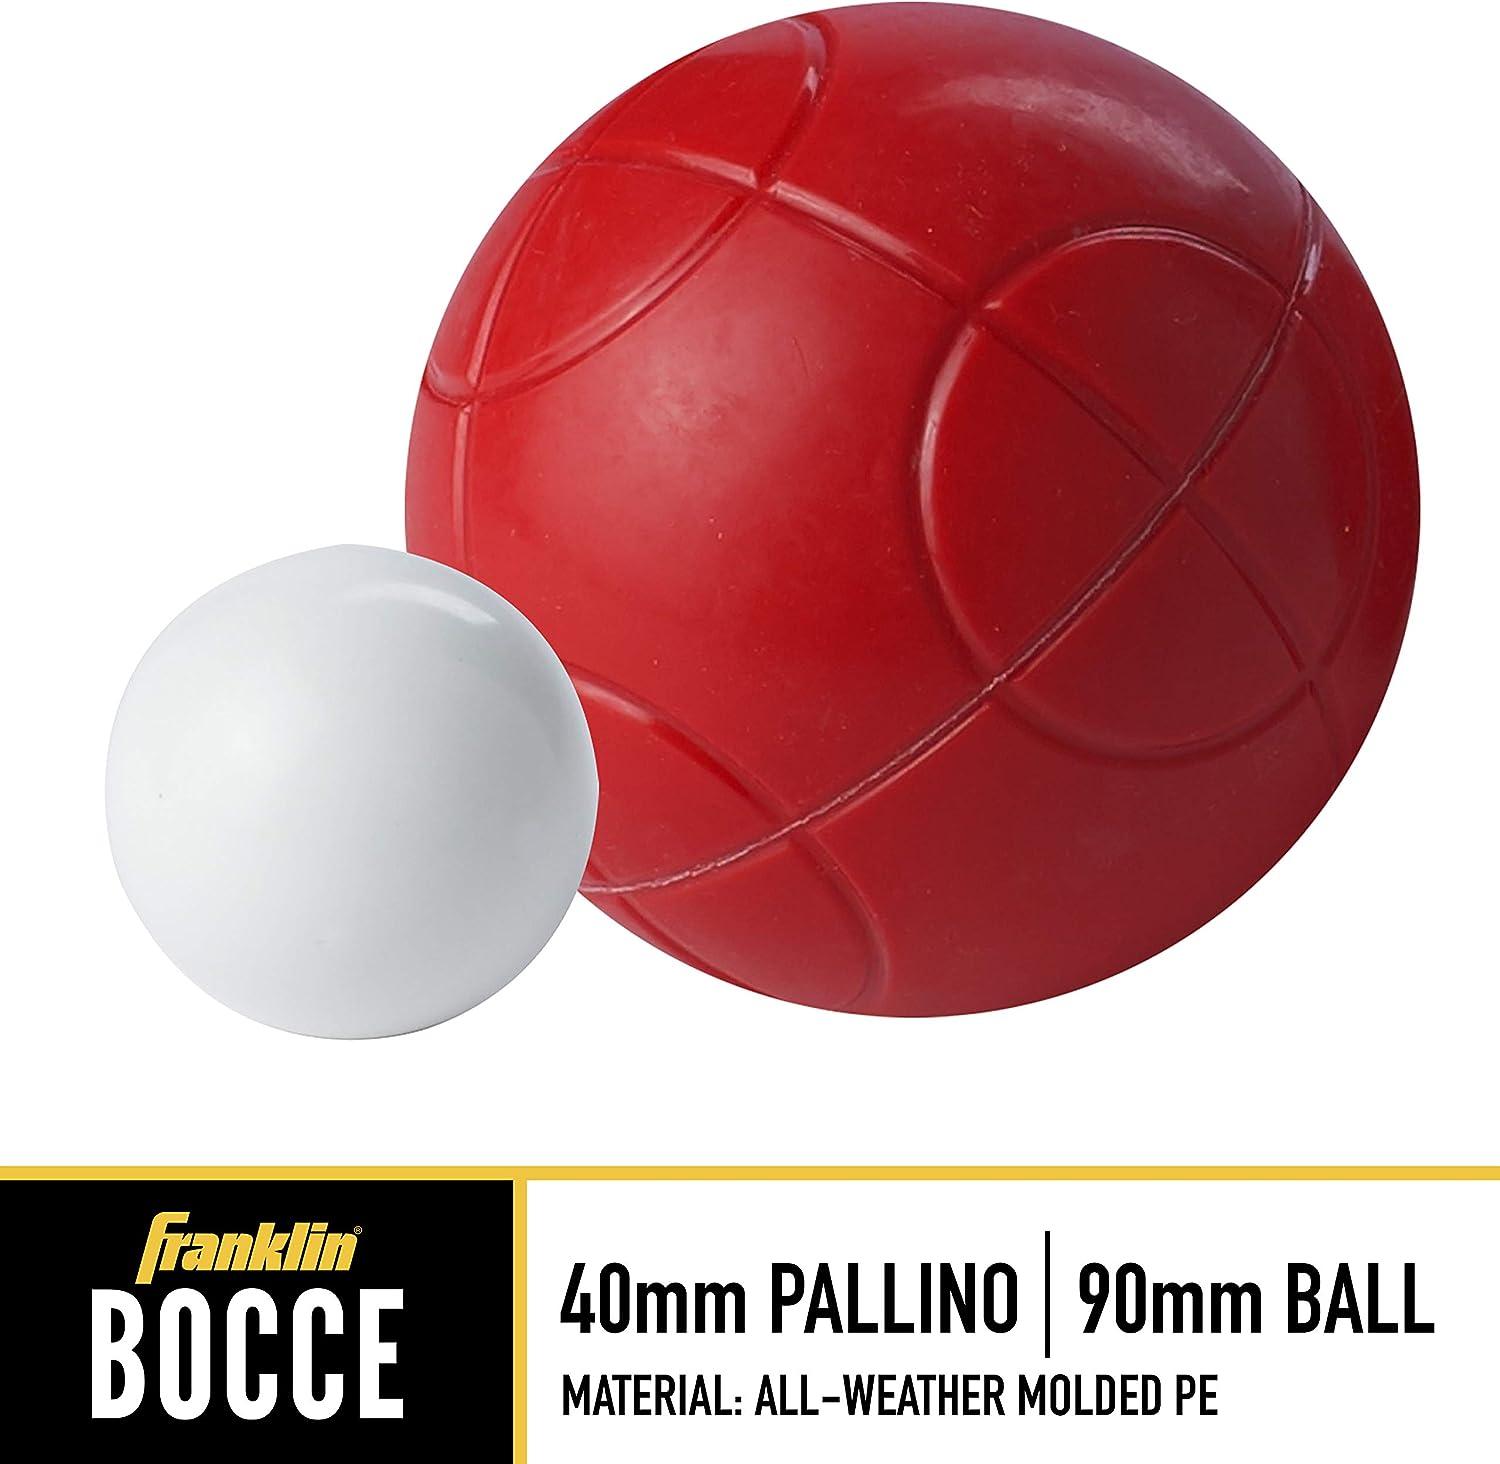 Franklin Sports 52021 8 Ball American Family Bocce Ball Game Set